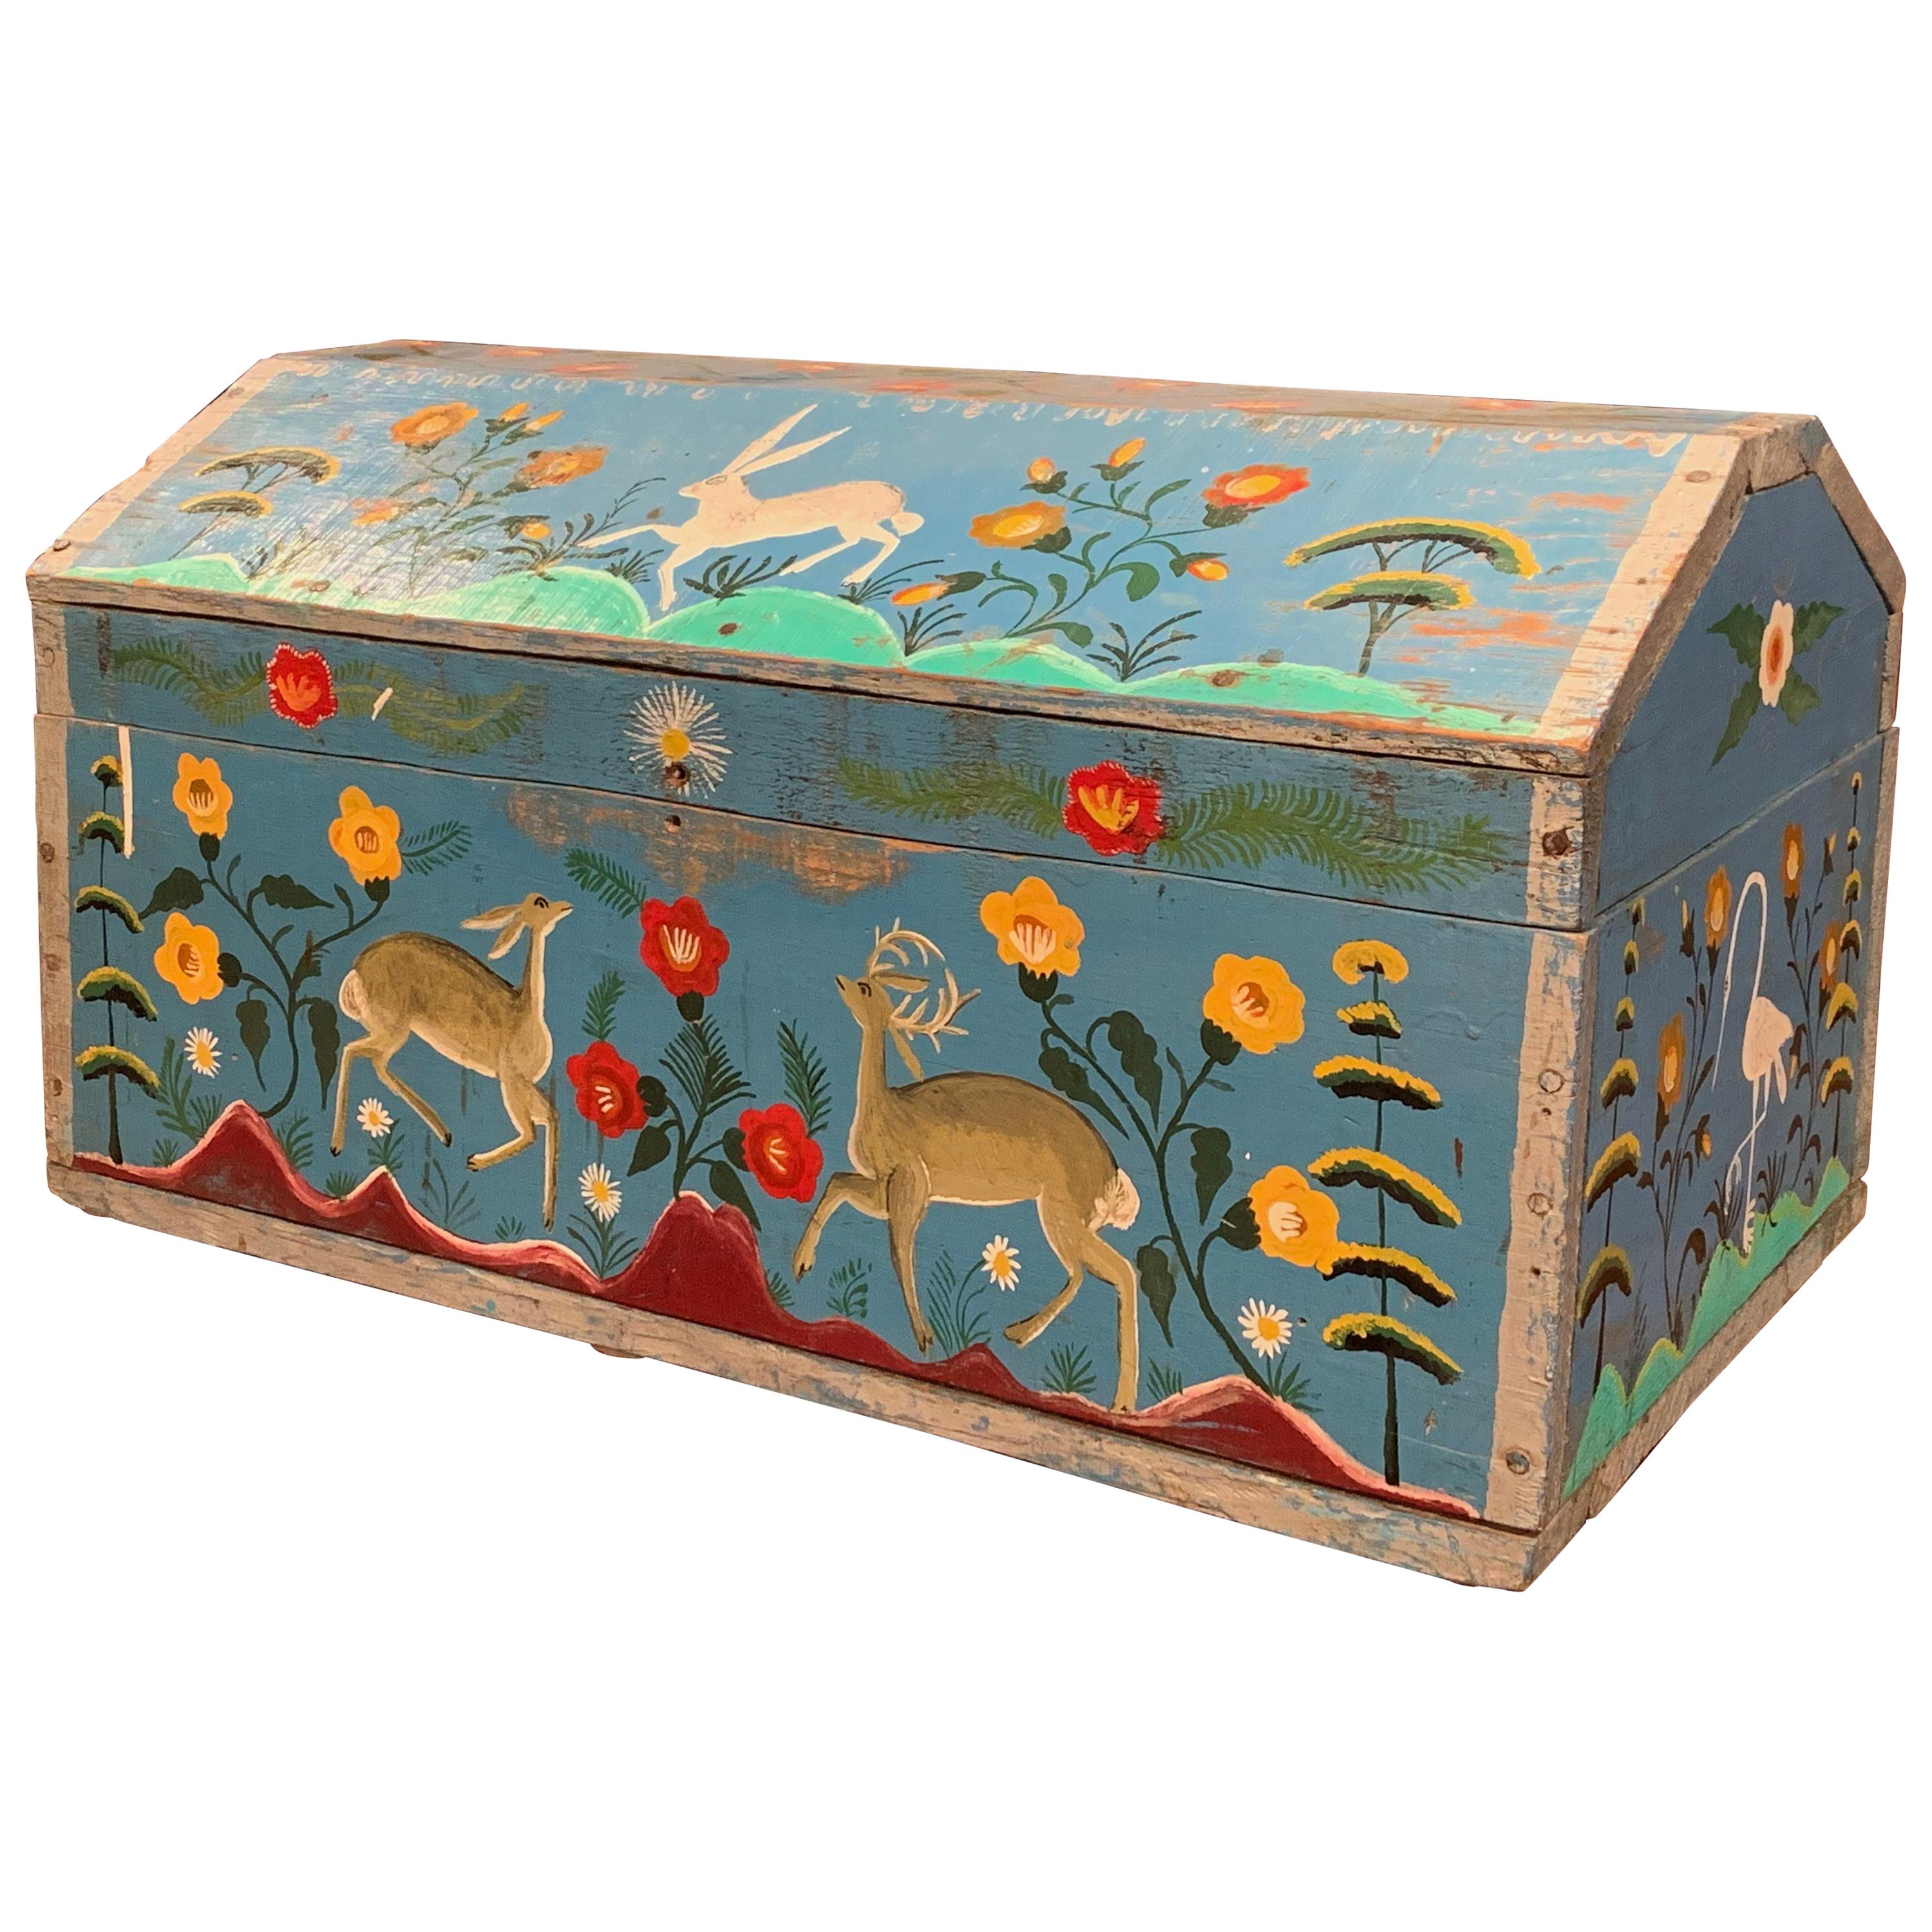 19th Century French Hand Painted Trunk with Rabbit and Deer Motifs from Normandy